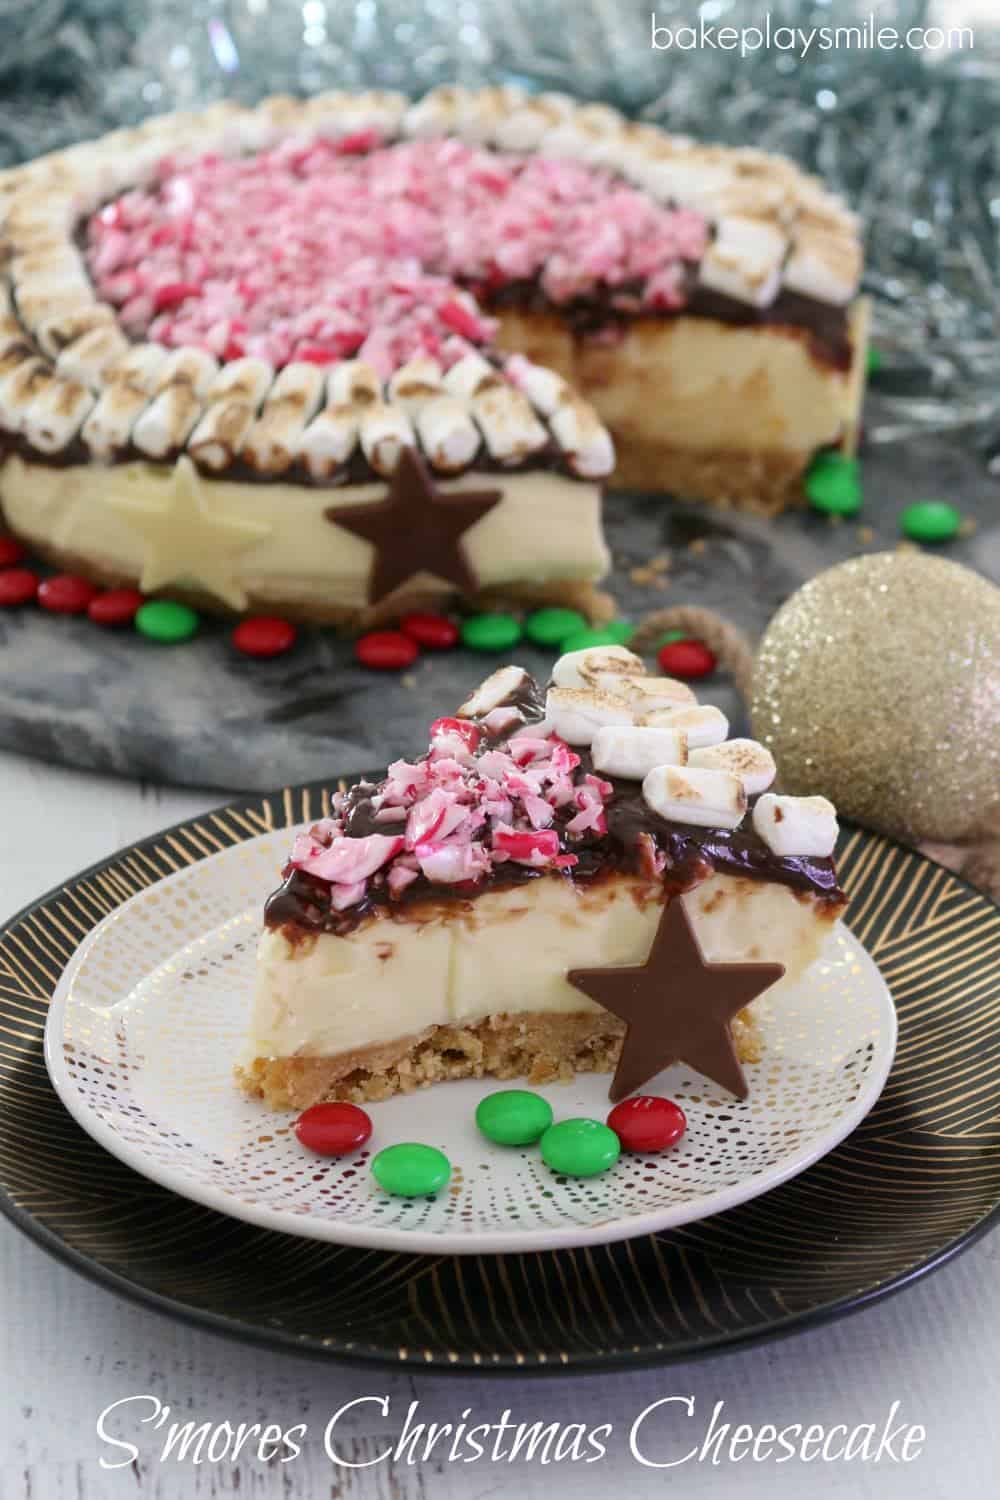 A slice of smore's Christmas cheesecake on a plate